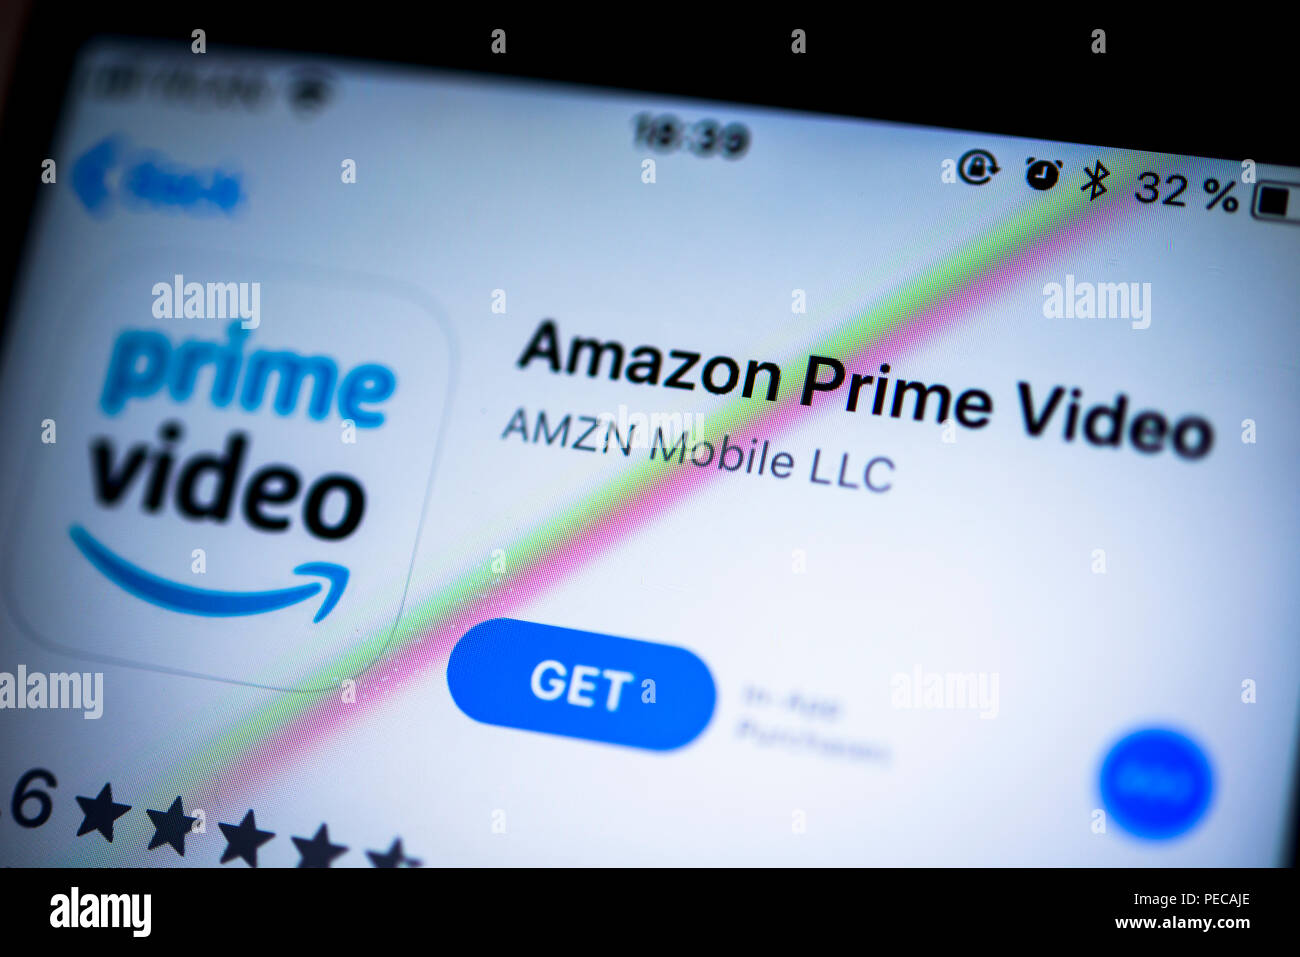 Amazon Prime Video App In The Apple App Store Video Streaming Service App Icon Iphone Ios Smartphone Display Close Up Stock Photo Alamy